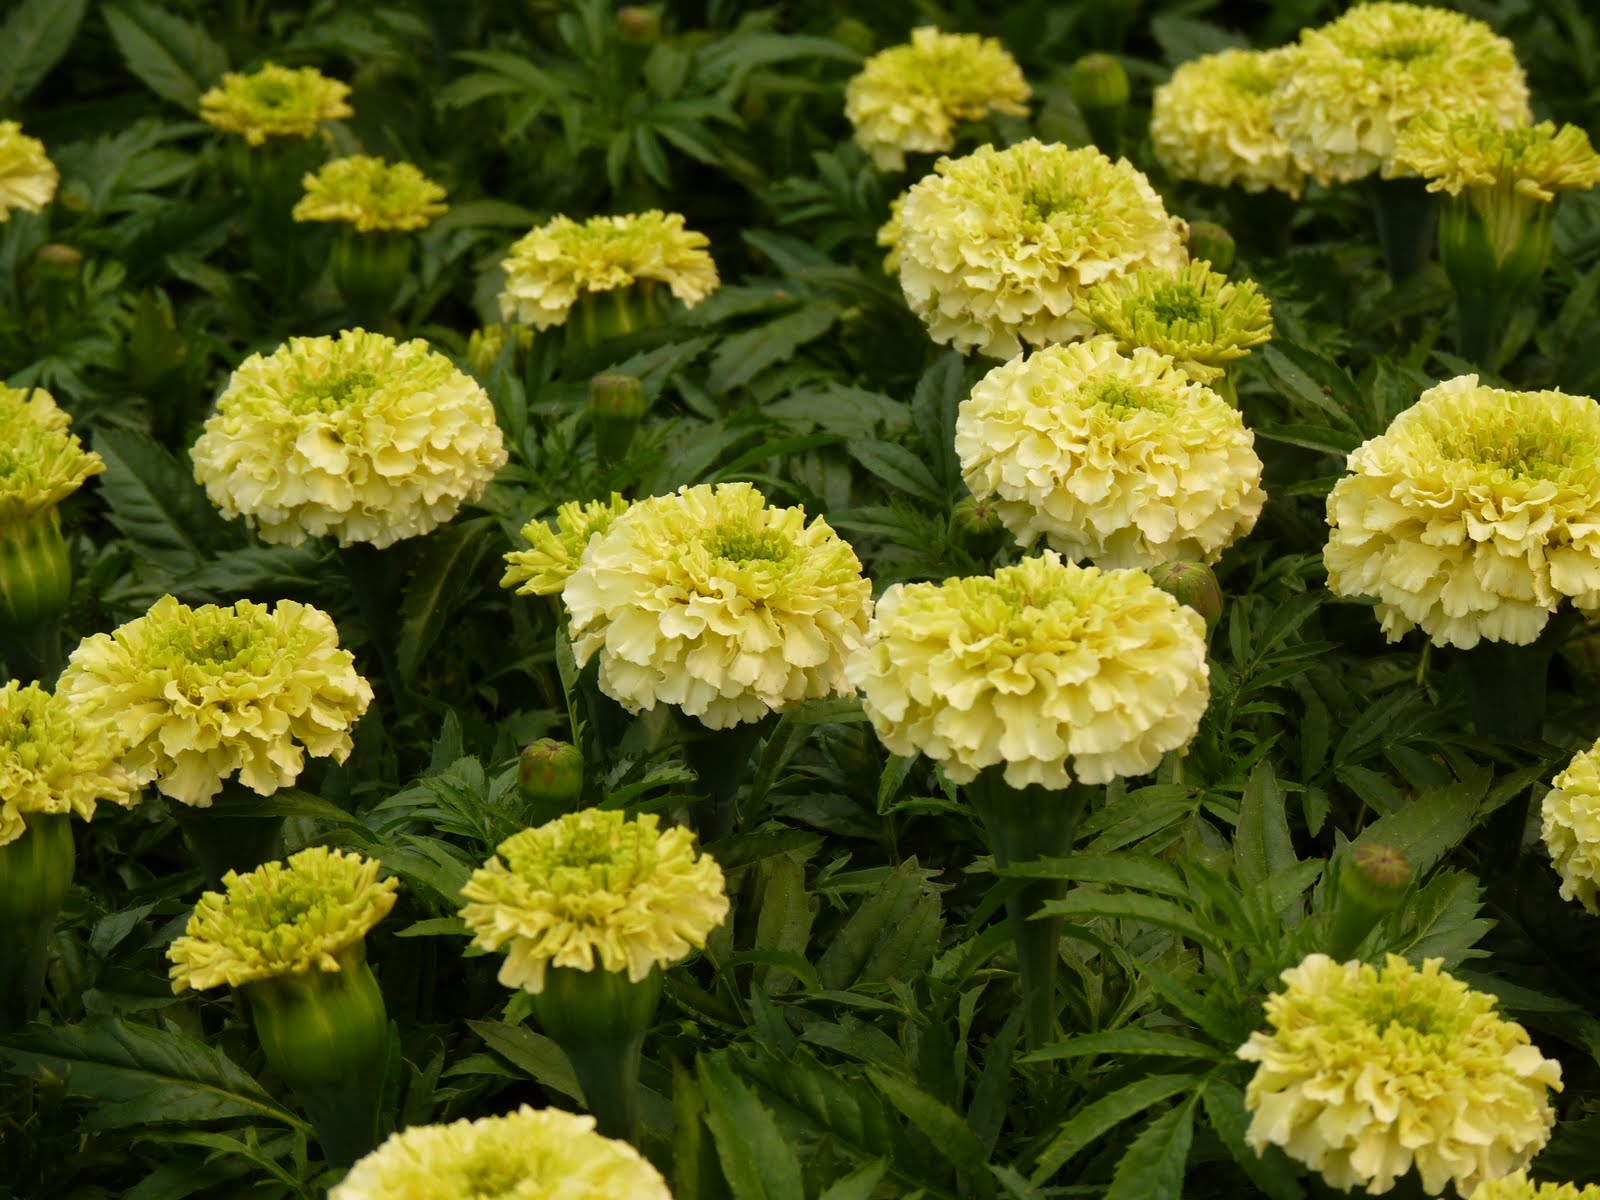 Houston Gardens: French Marigolds - What's In A Name?